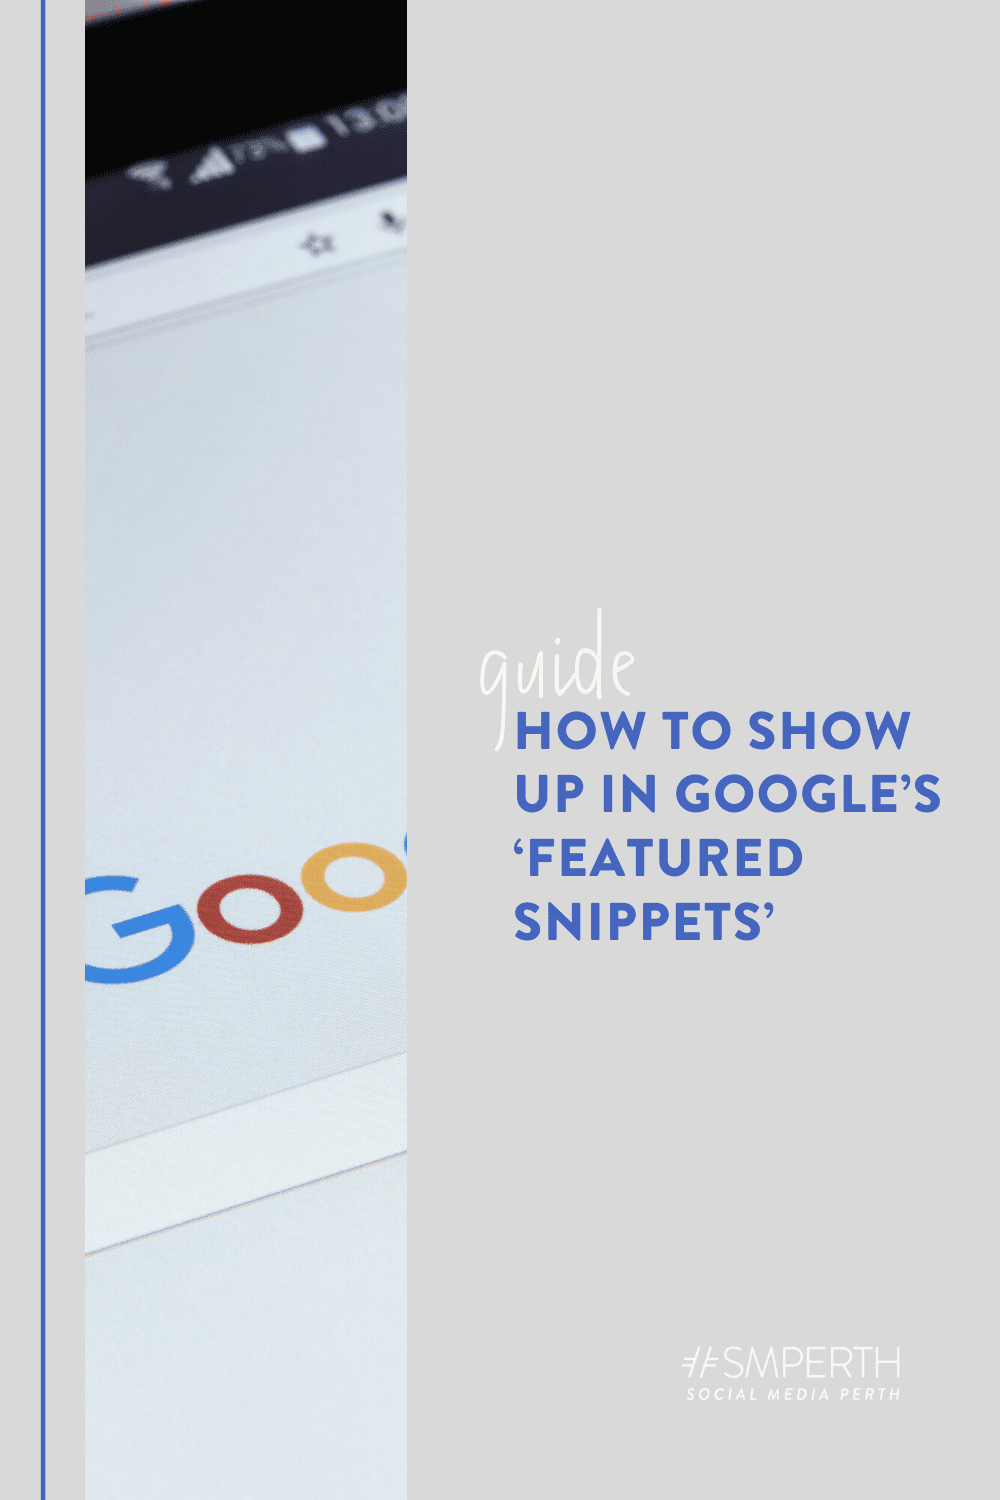 How to show up in Google’s ‘featured snippets’